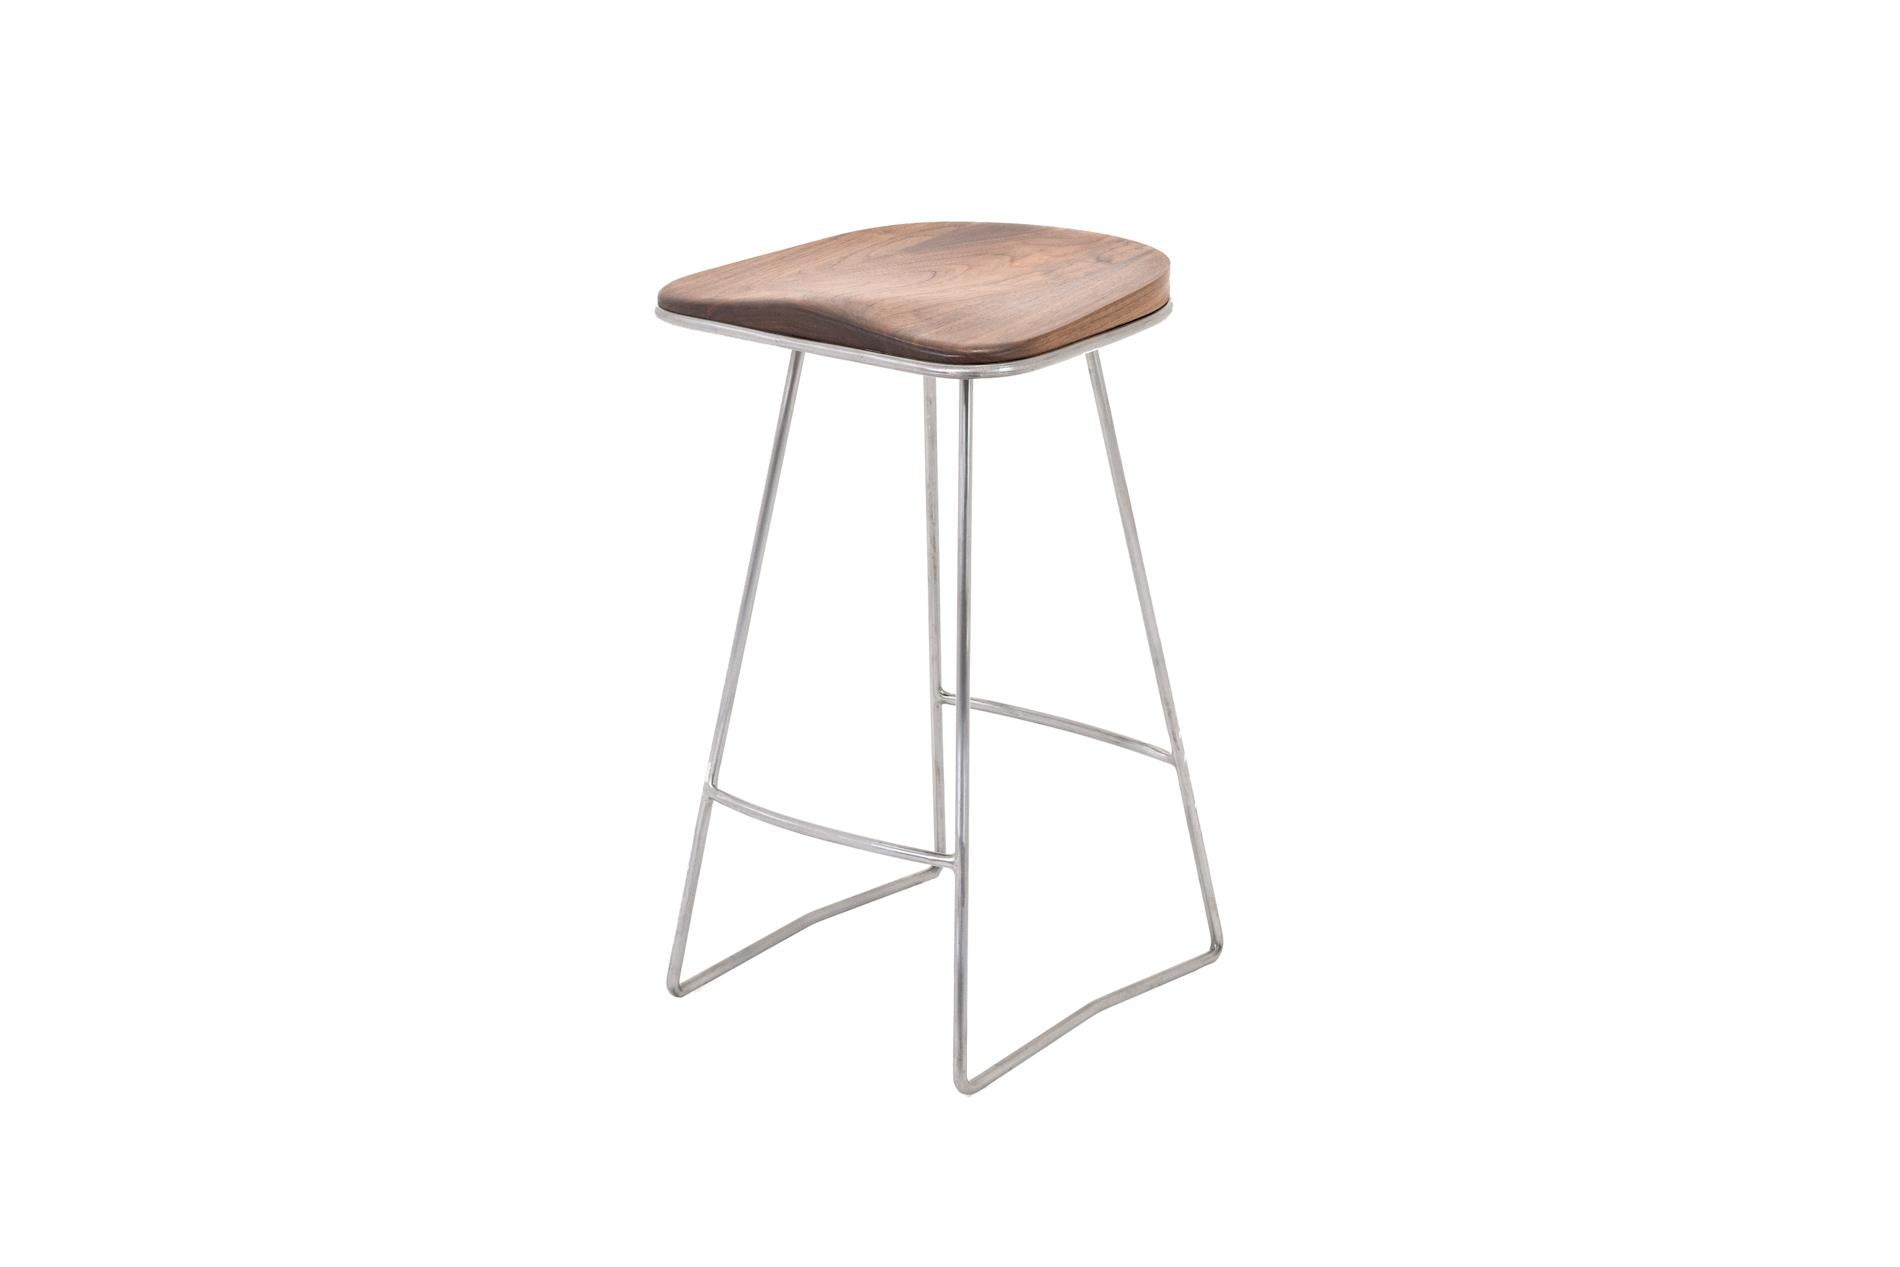 The Plug is a bar stool with an ergonomic shaped solid wood seat and a handcrafted steel frame. The shaped walnut seat enclosed in a signature metal frame is as relaxing as it is beautifully protected by the steel edge. The contour lines are soft to